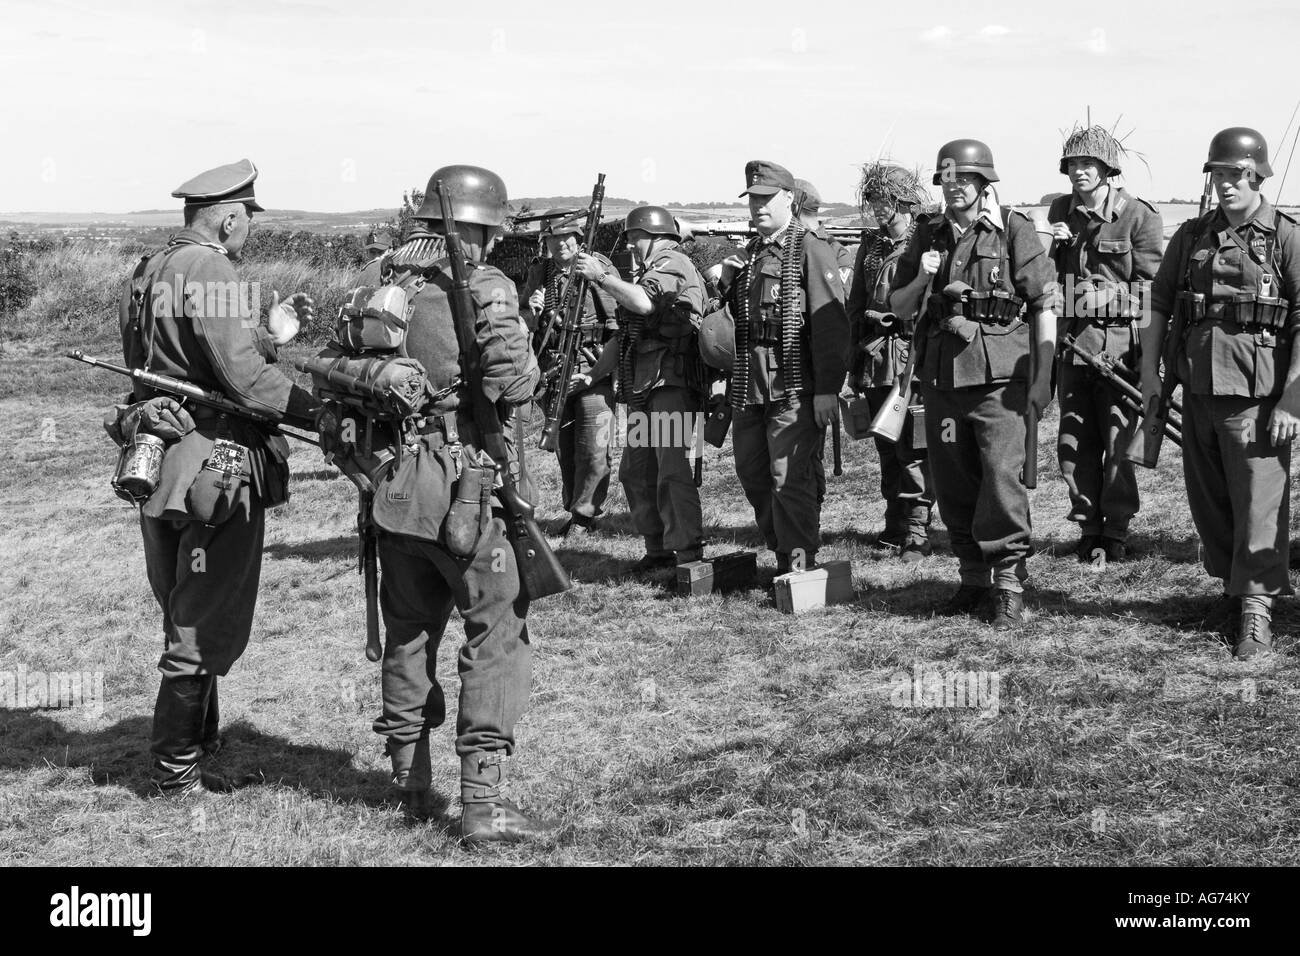 WW2 era German infantry soldiers on Parade in Normandy France  1944 Stock Photo